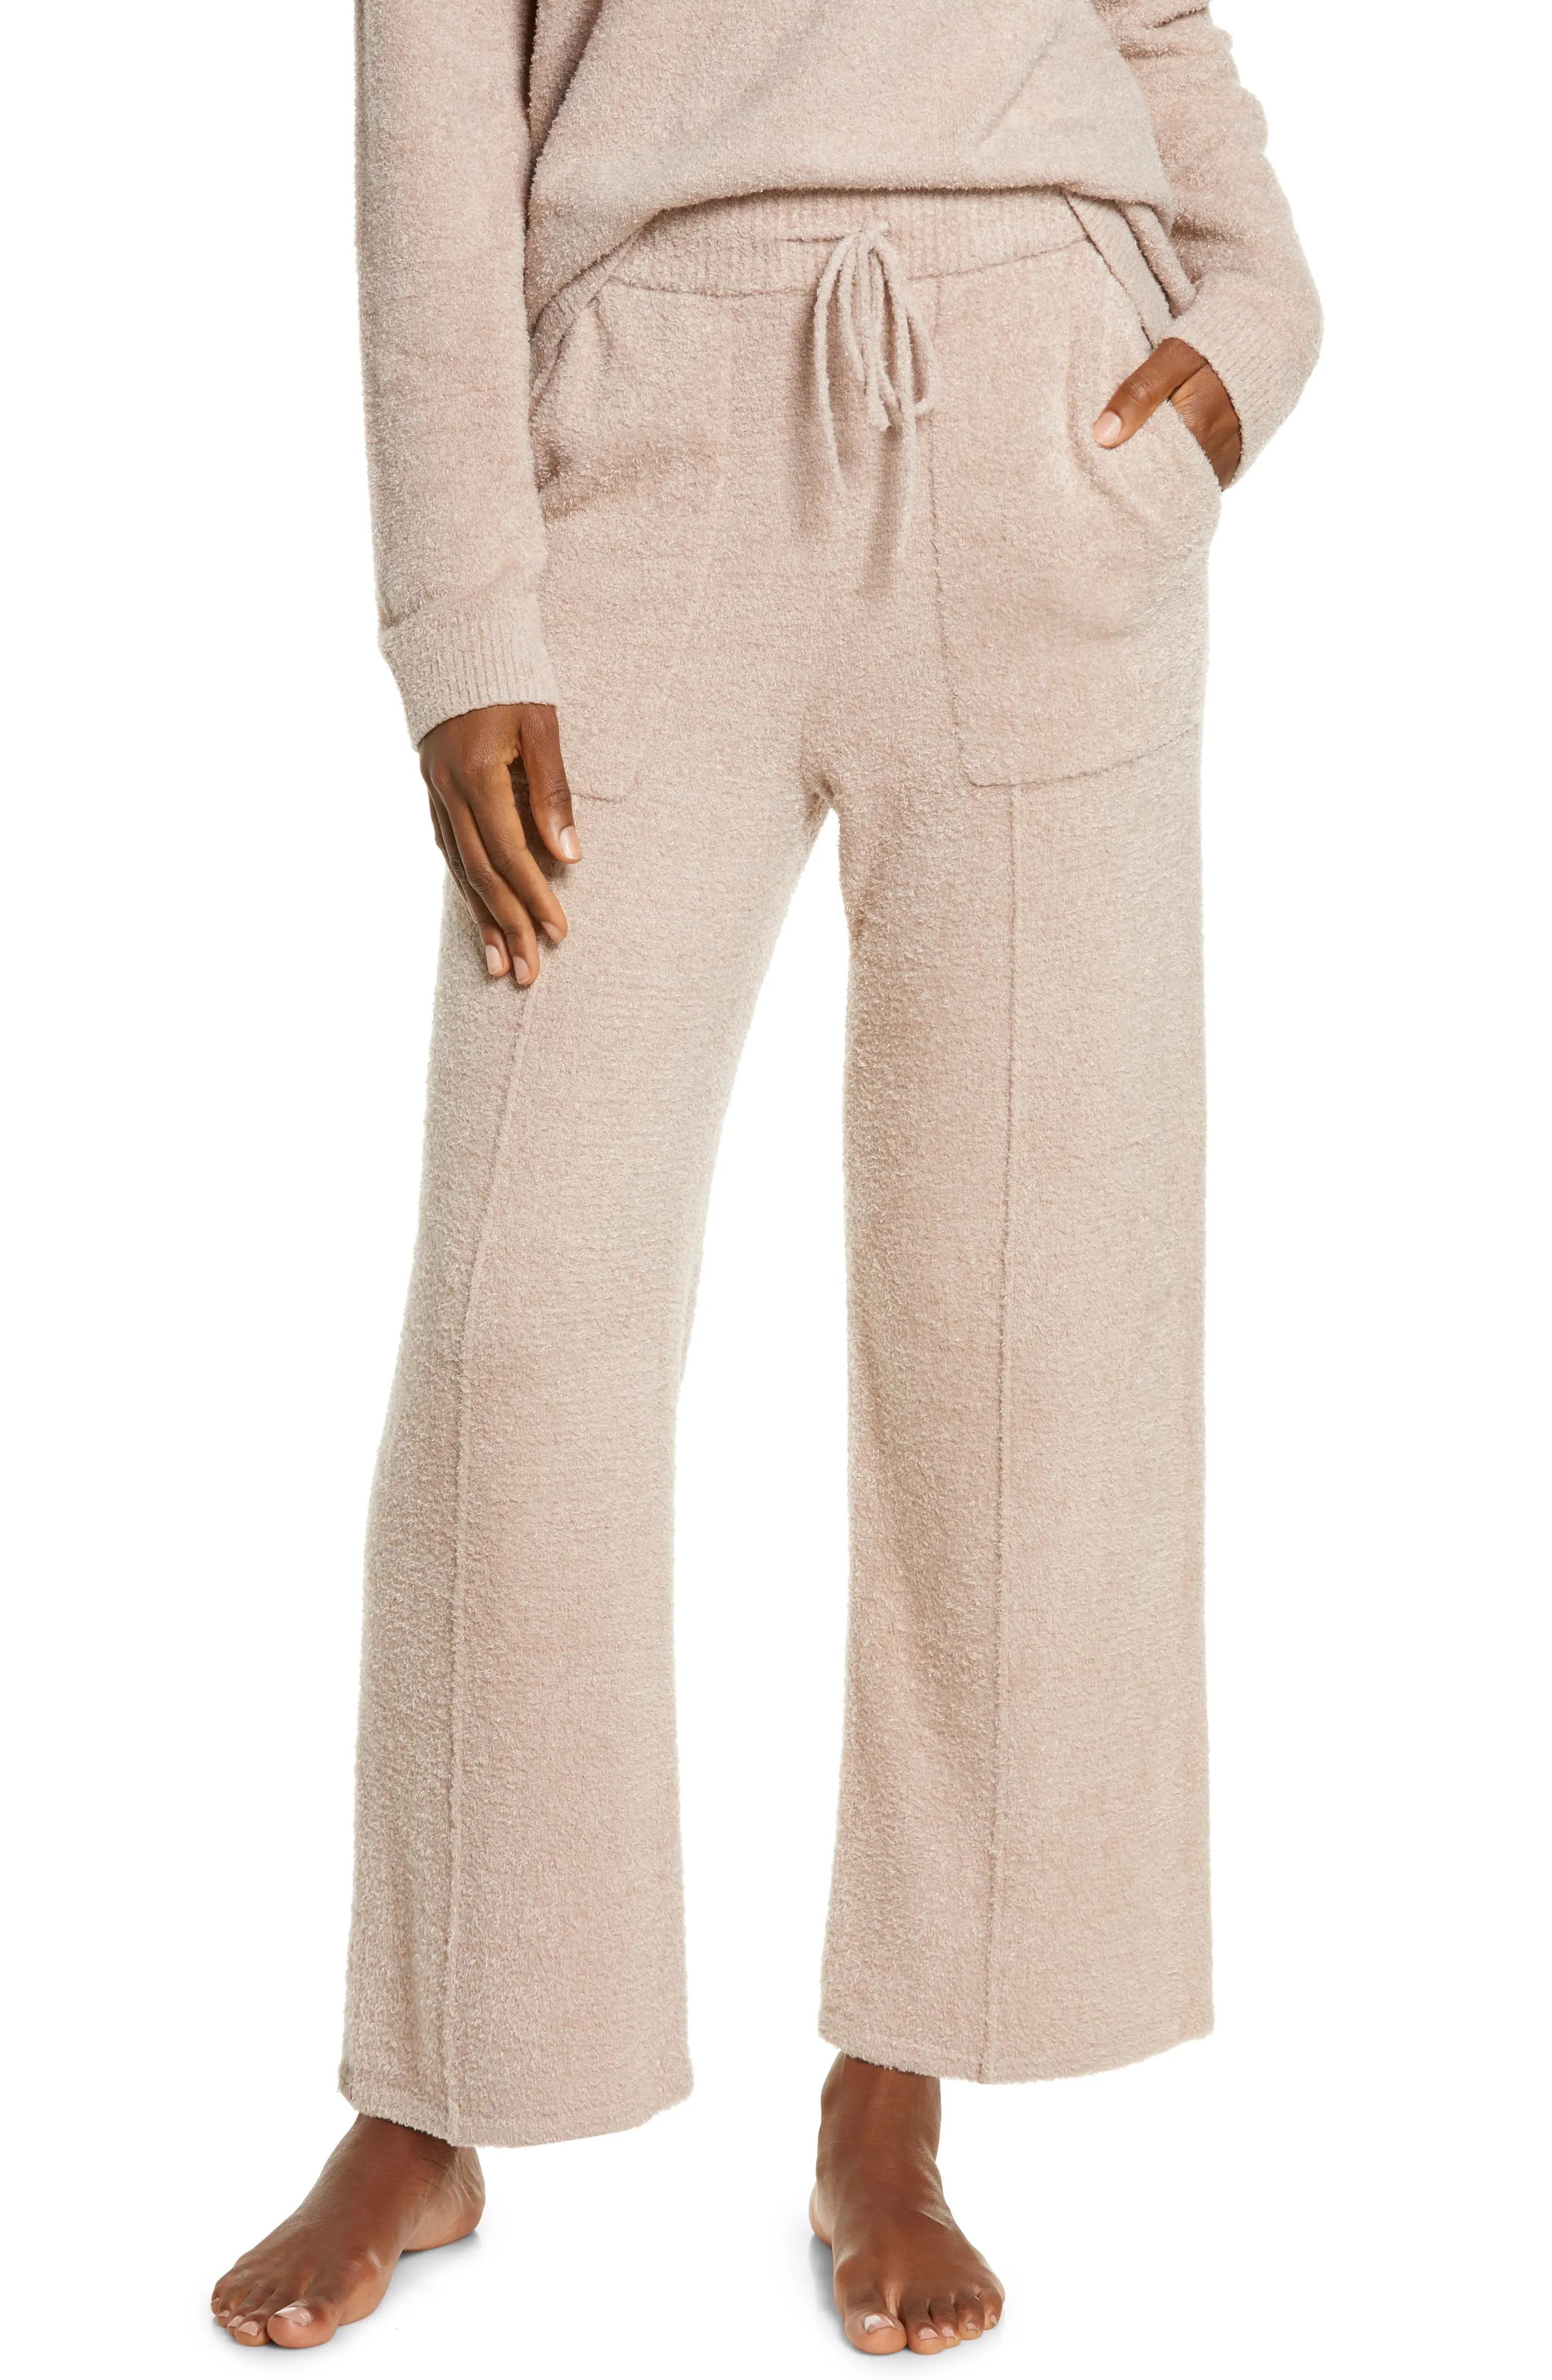 Barefoot Dreams(R) CozyChic Lite(R) Seamed Crop Lounge Pants in Feather at Nordstrom, Size Large | Nordstrom